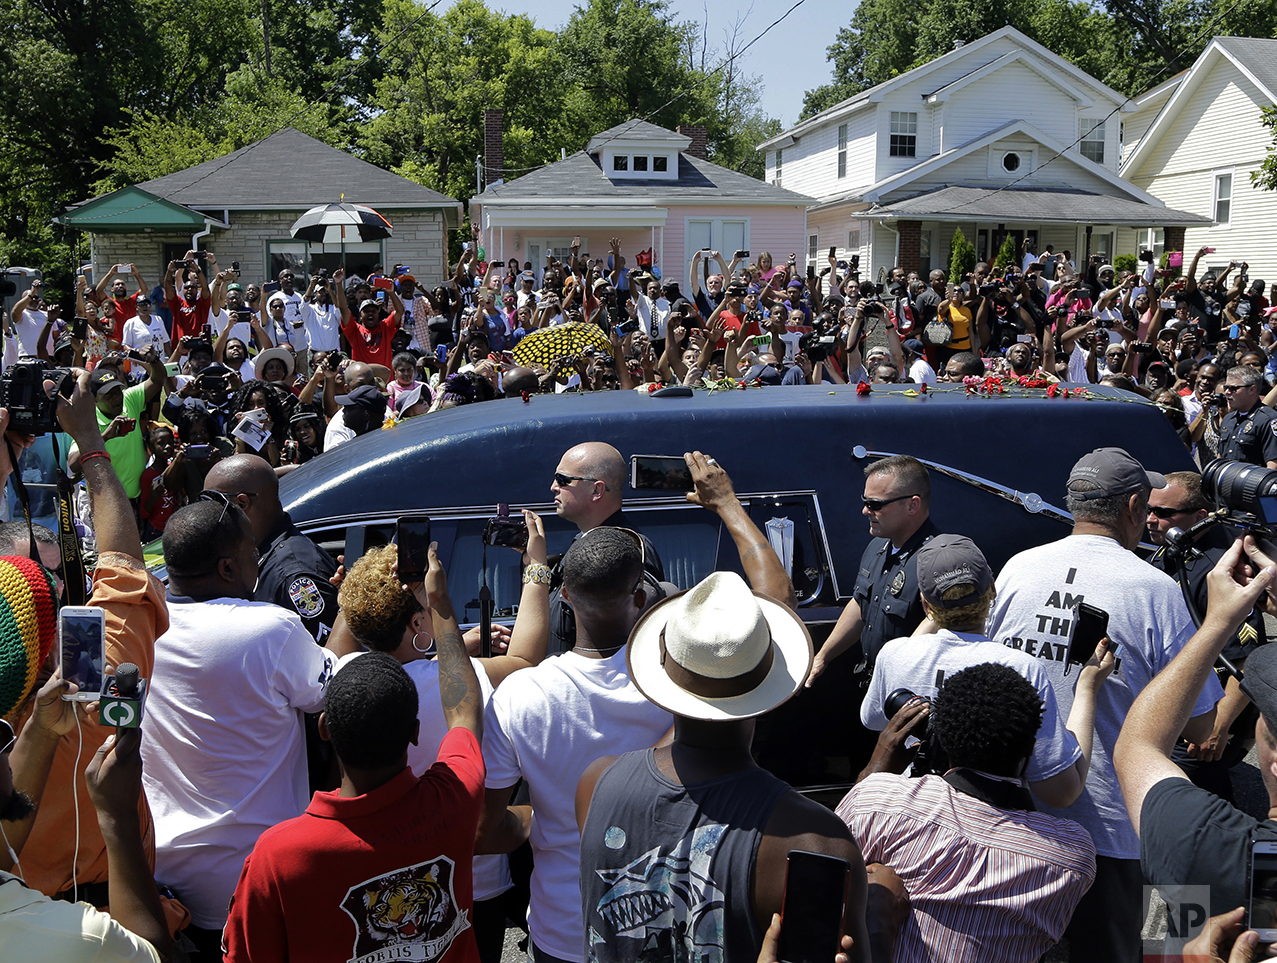  The hearse carrying the body of Muhammad Ali passes in front of his boyhood home, top center, during his funeral procession in Louisville, Ky., on June 10, 2016. Ali, born Cassius Clay, died on June 3 at age 74. (AP Photo/Mark Humphrey) 